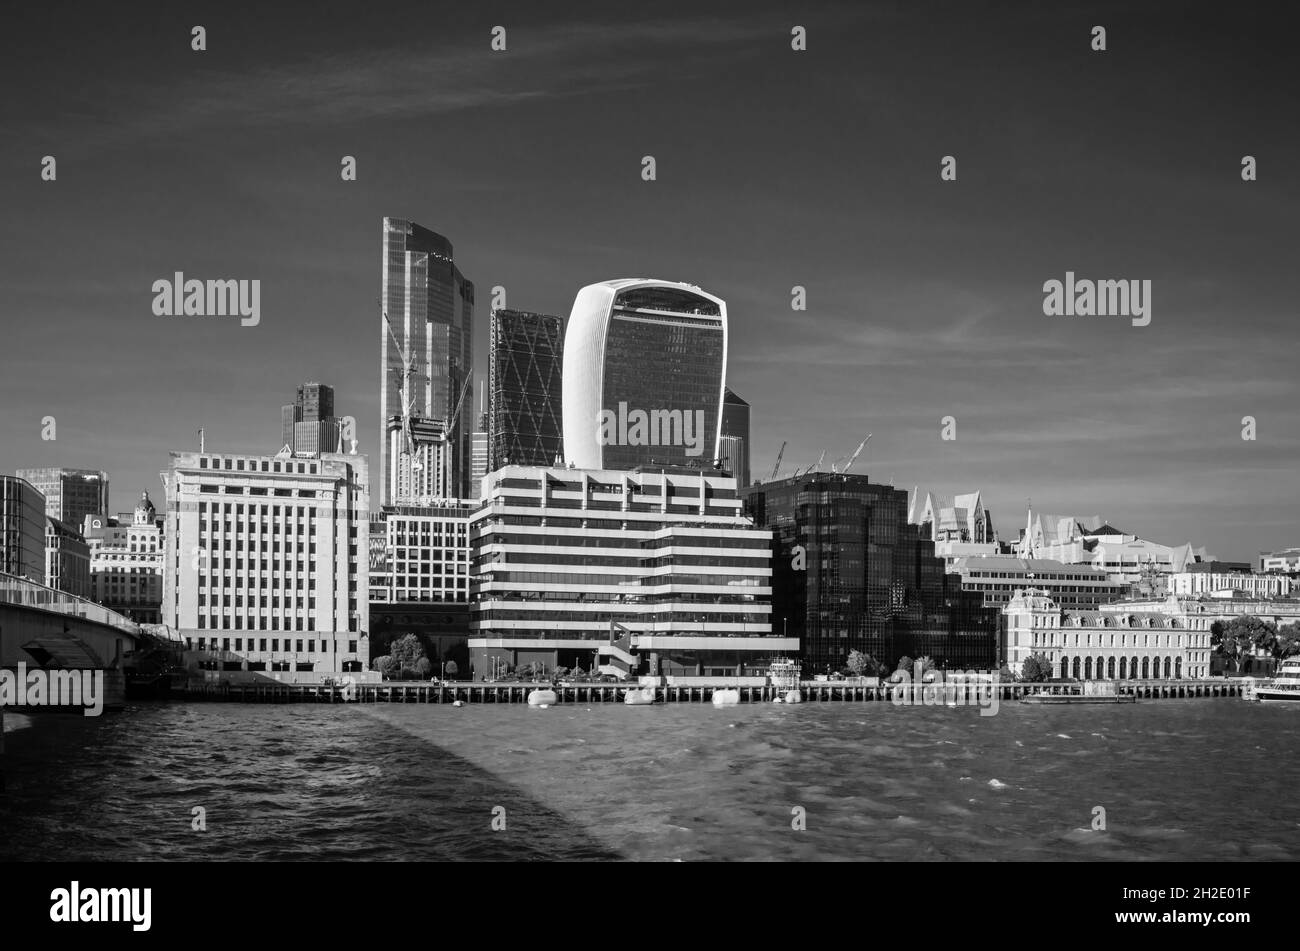 Panorama of the River Thames North Bank City of London financial district from London Bridge towards Docklands across the Pool of London: monochrome Stock Photo